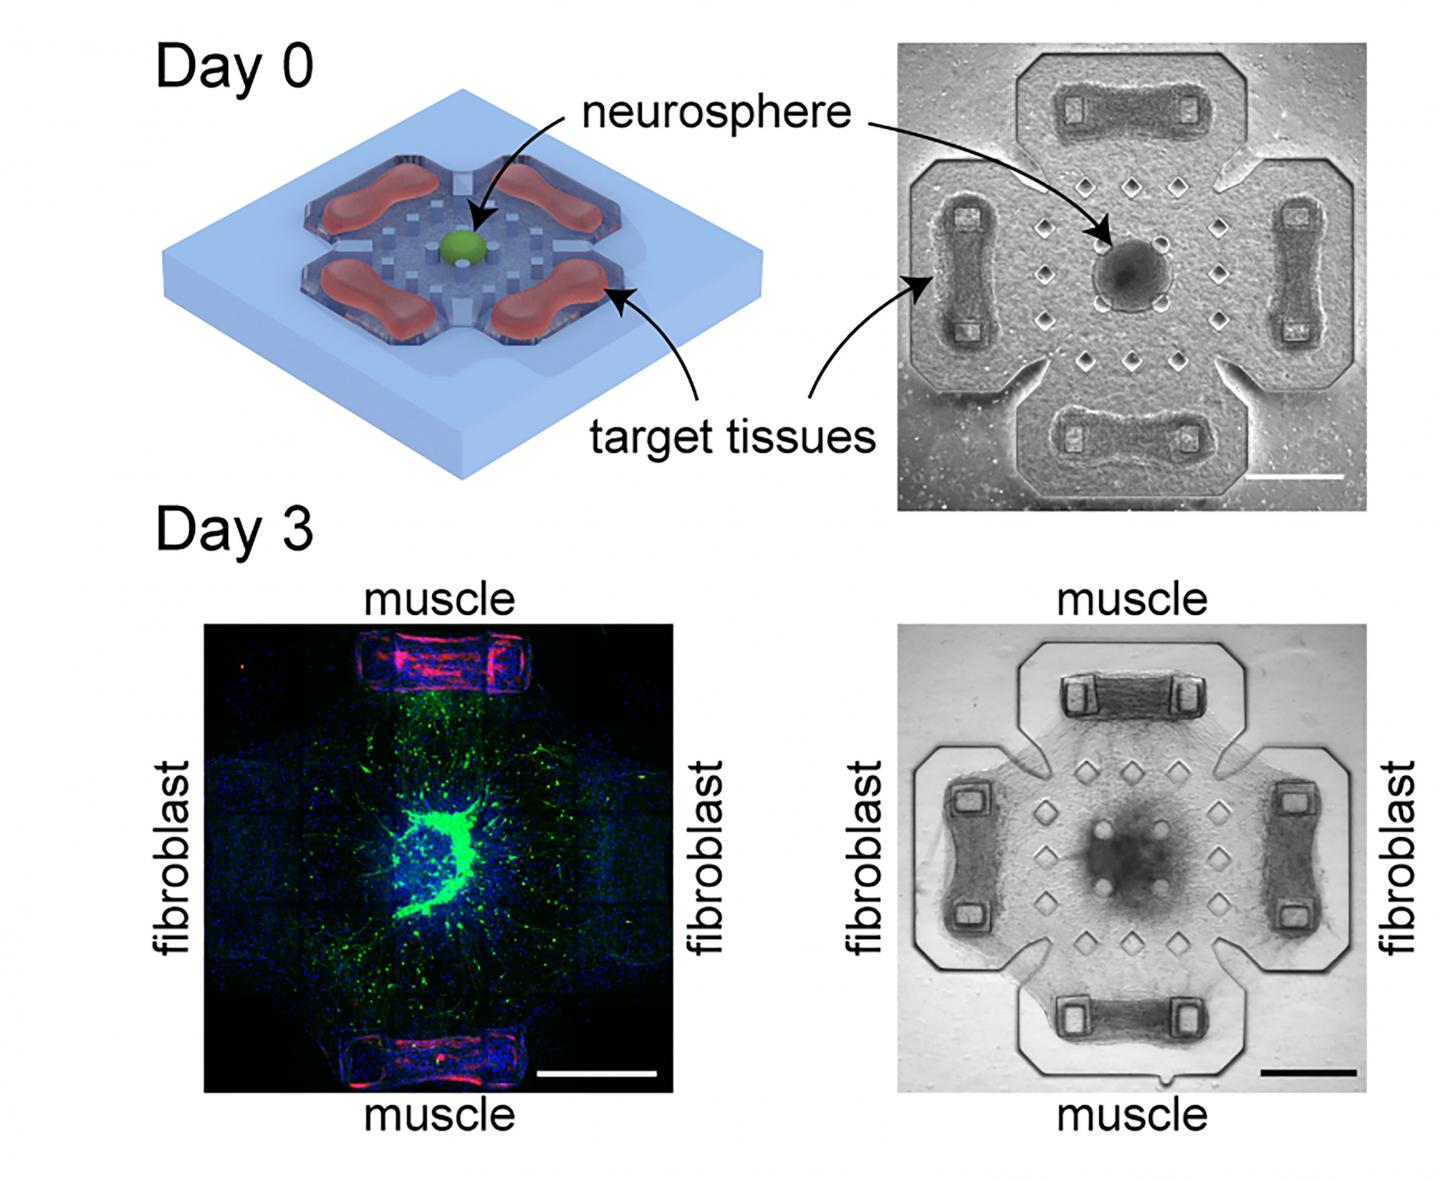 Illustration and microscopy images of coculture platform where a neurosphere is cultured with four target tissues